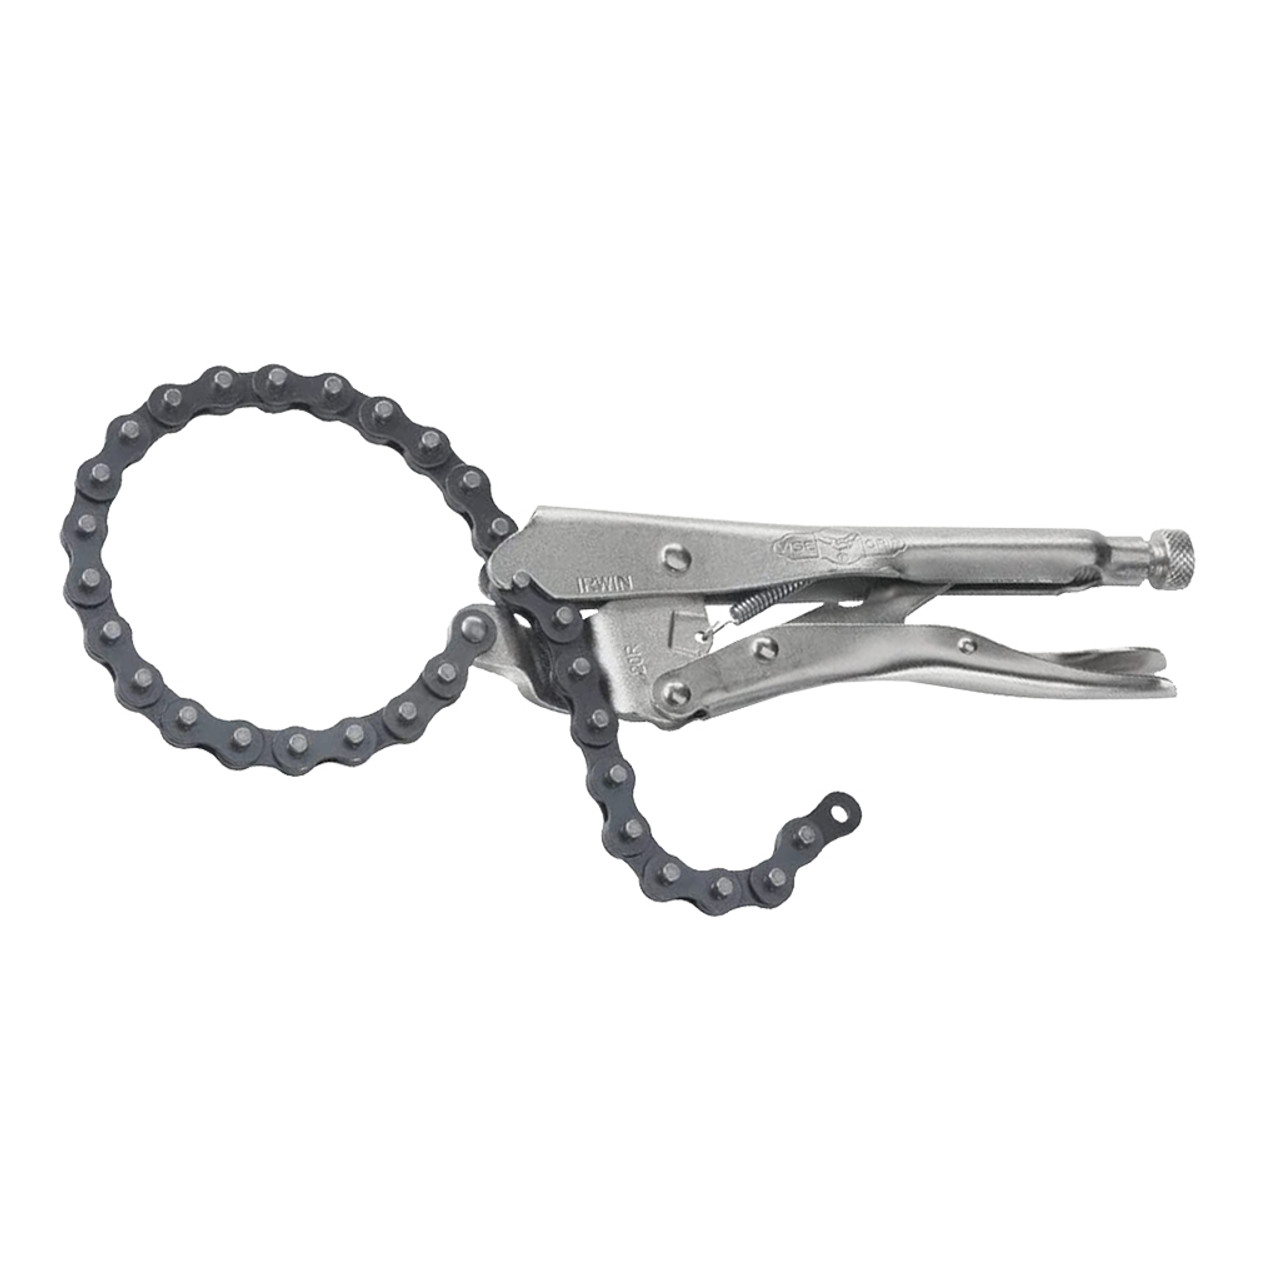 Vise-Grip Locking Chain Clamp | Midwest Technology